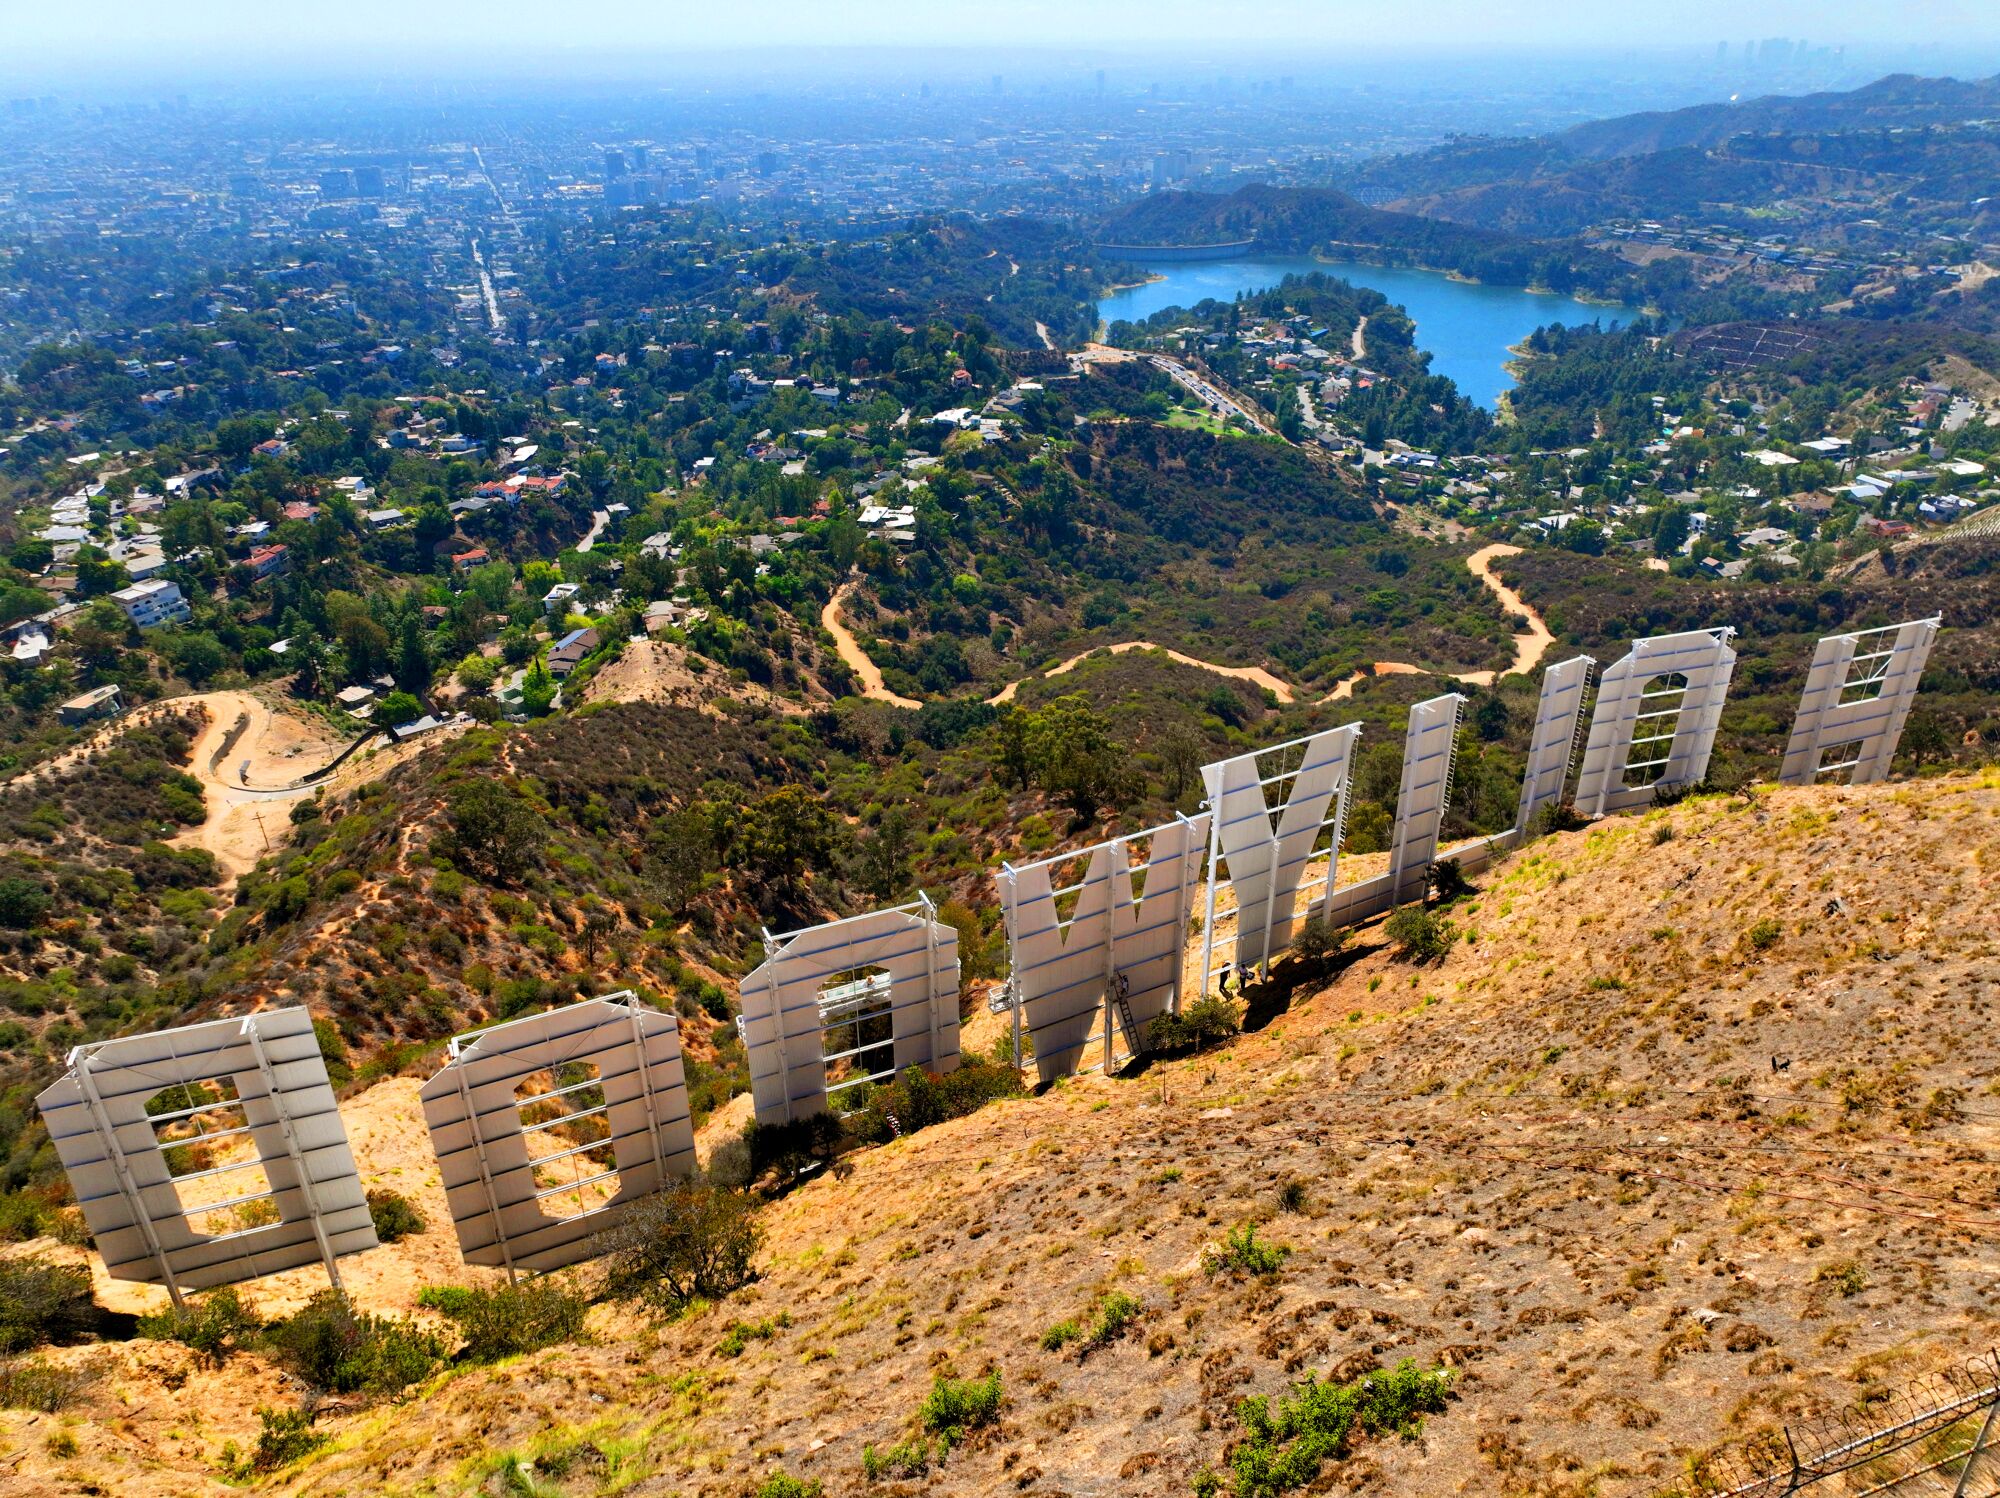 A view from the hillside behind the Hollywood sign